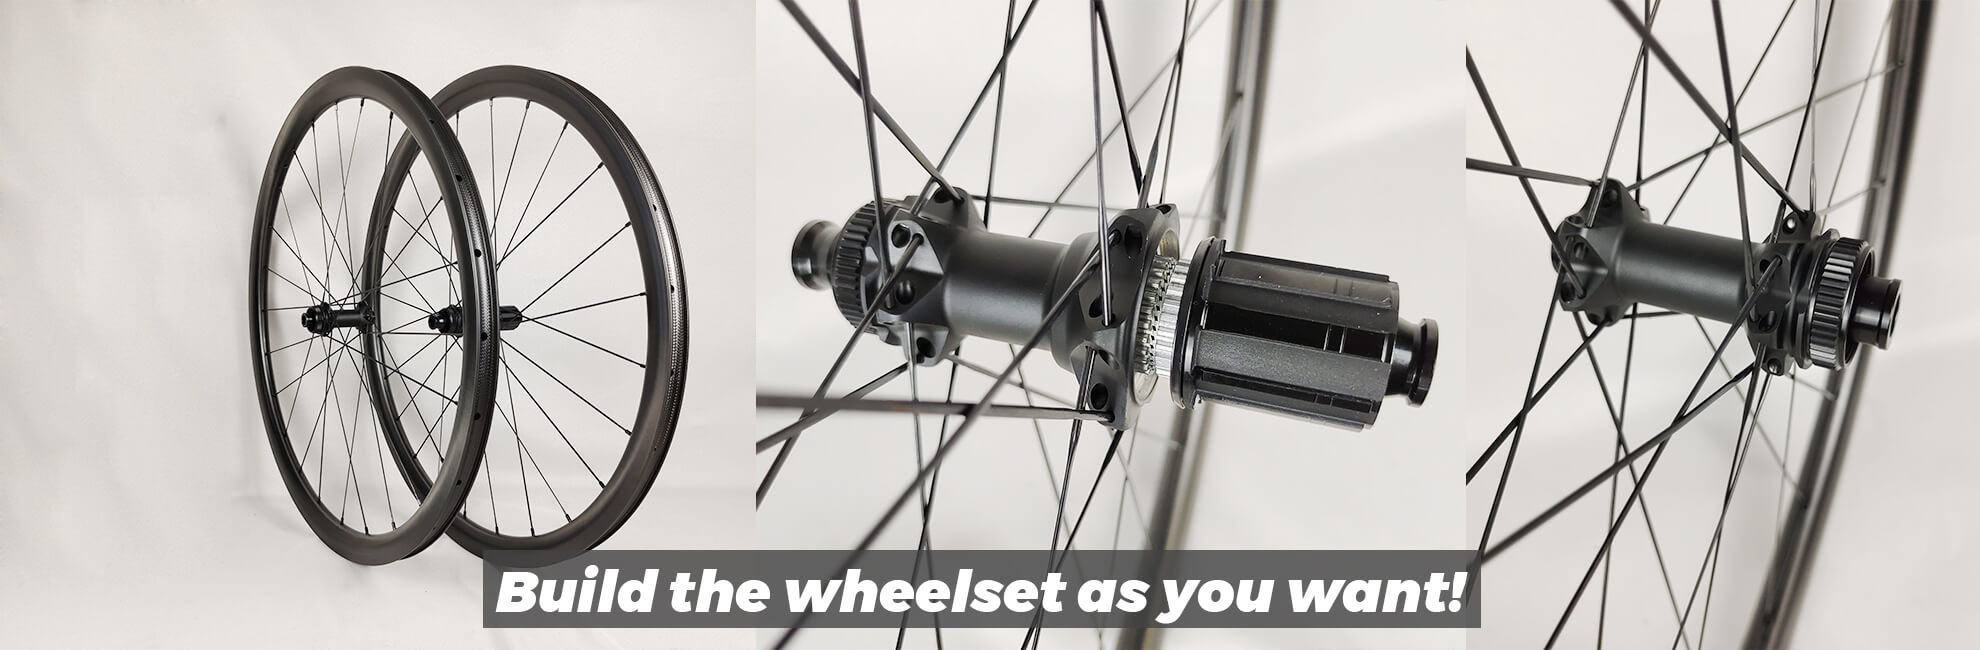 Build the carbon wheelset as you want